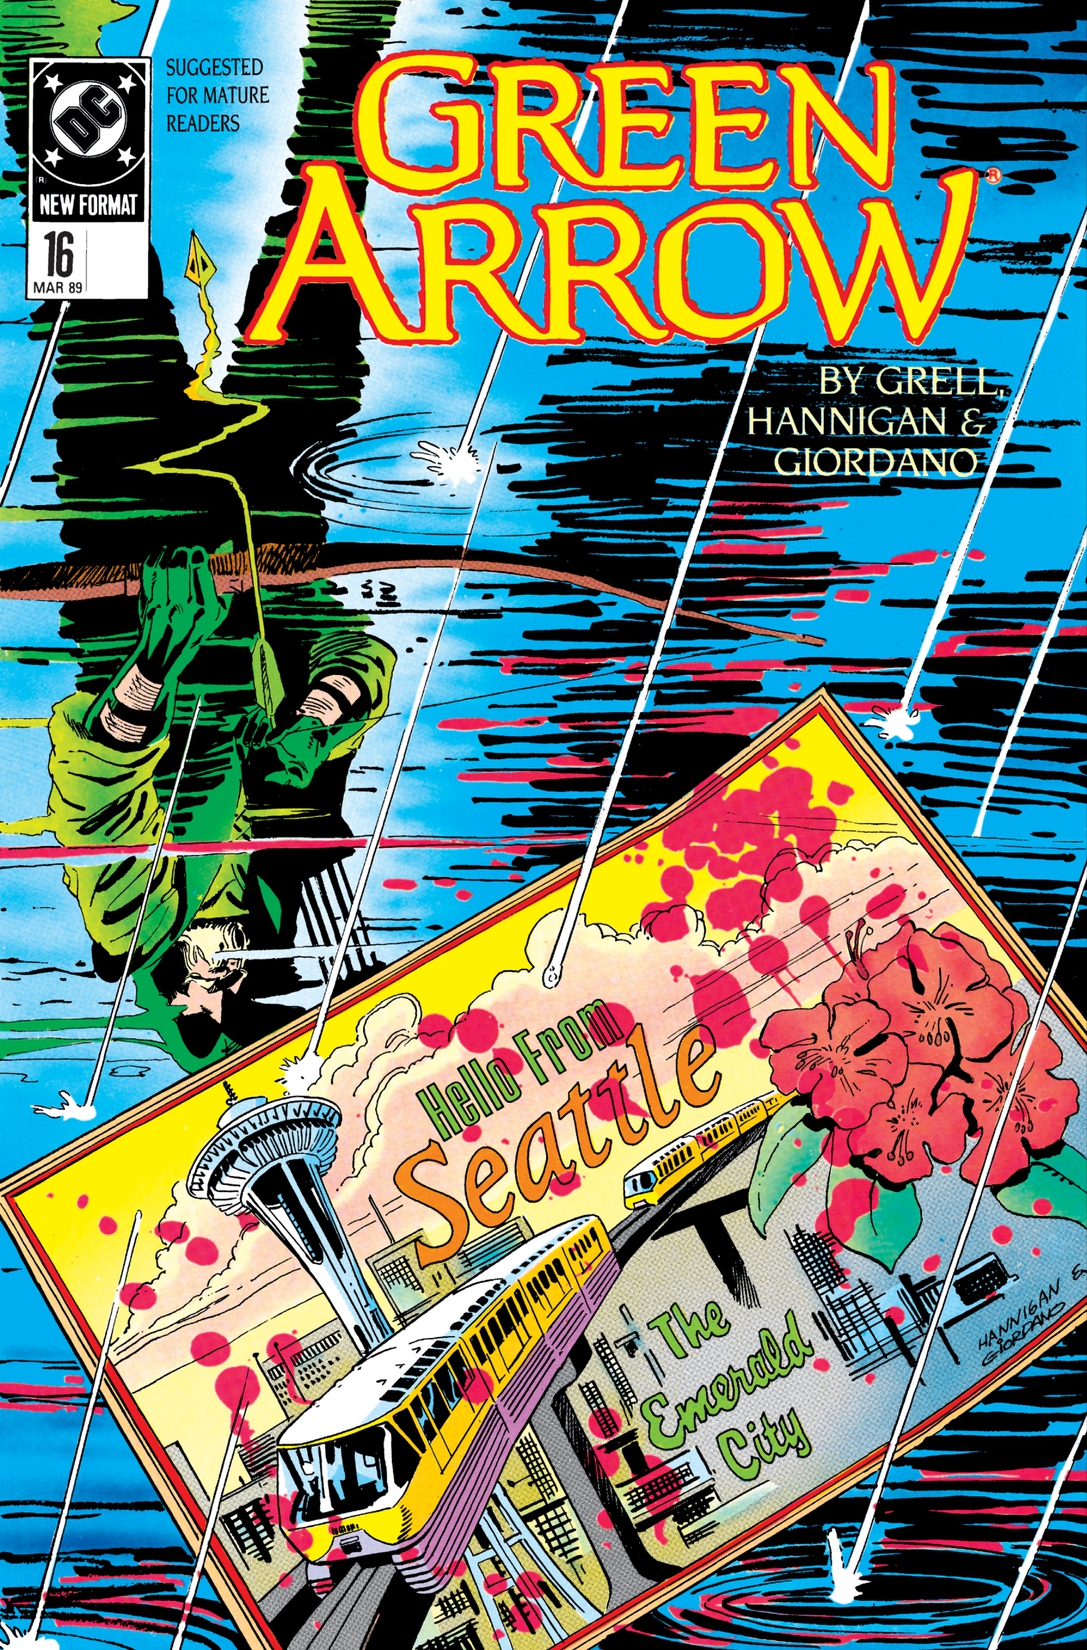 Green Arrow (1987-) #16 preview images